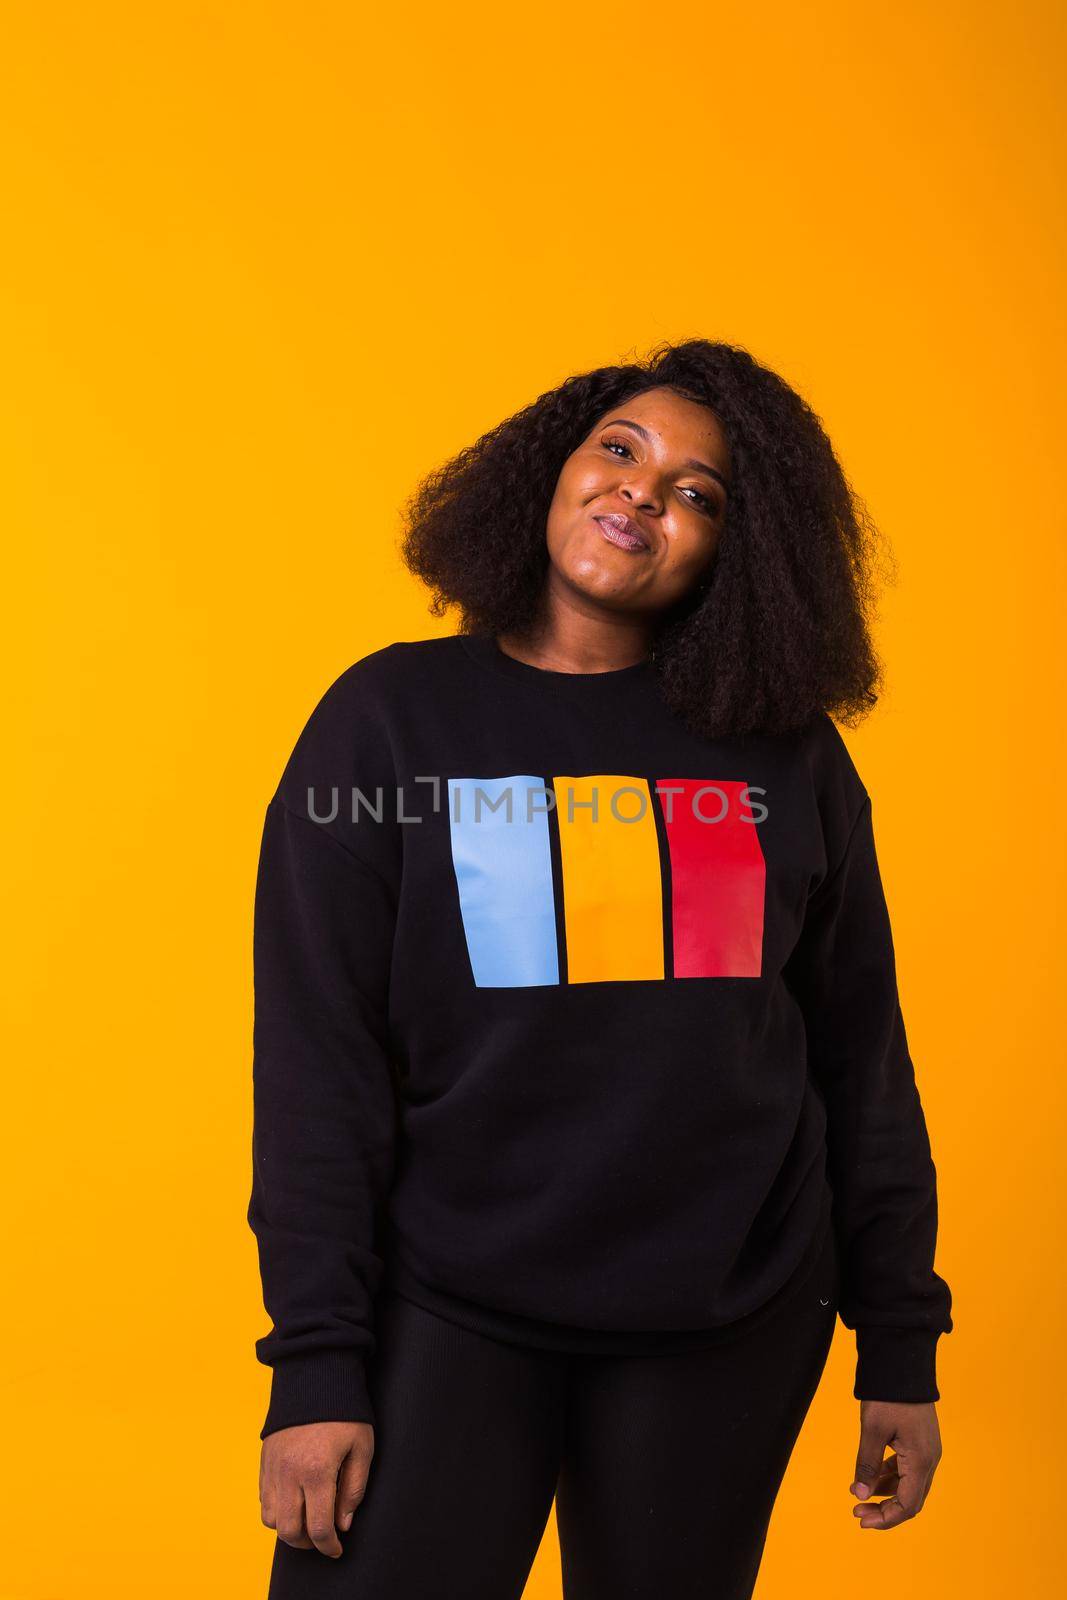 Youth fashion concept - Confident sexy black woman in stylish hoodie having fun on yellow background